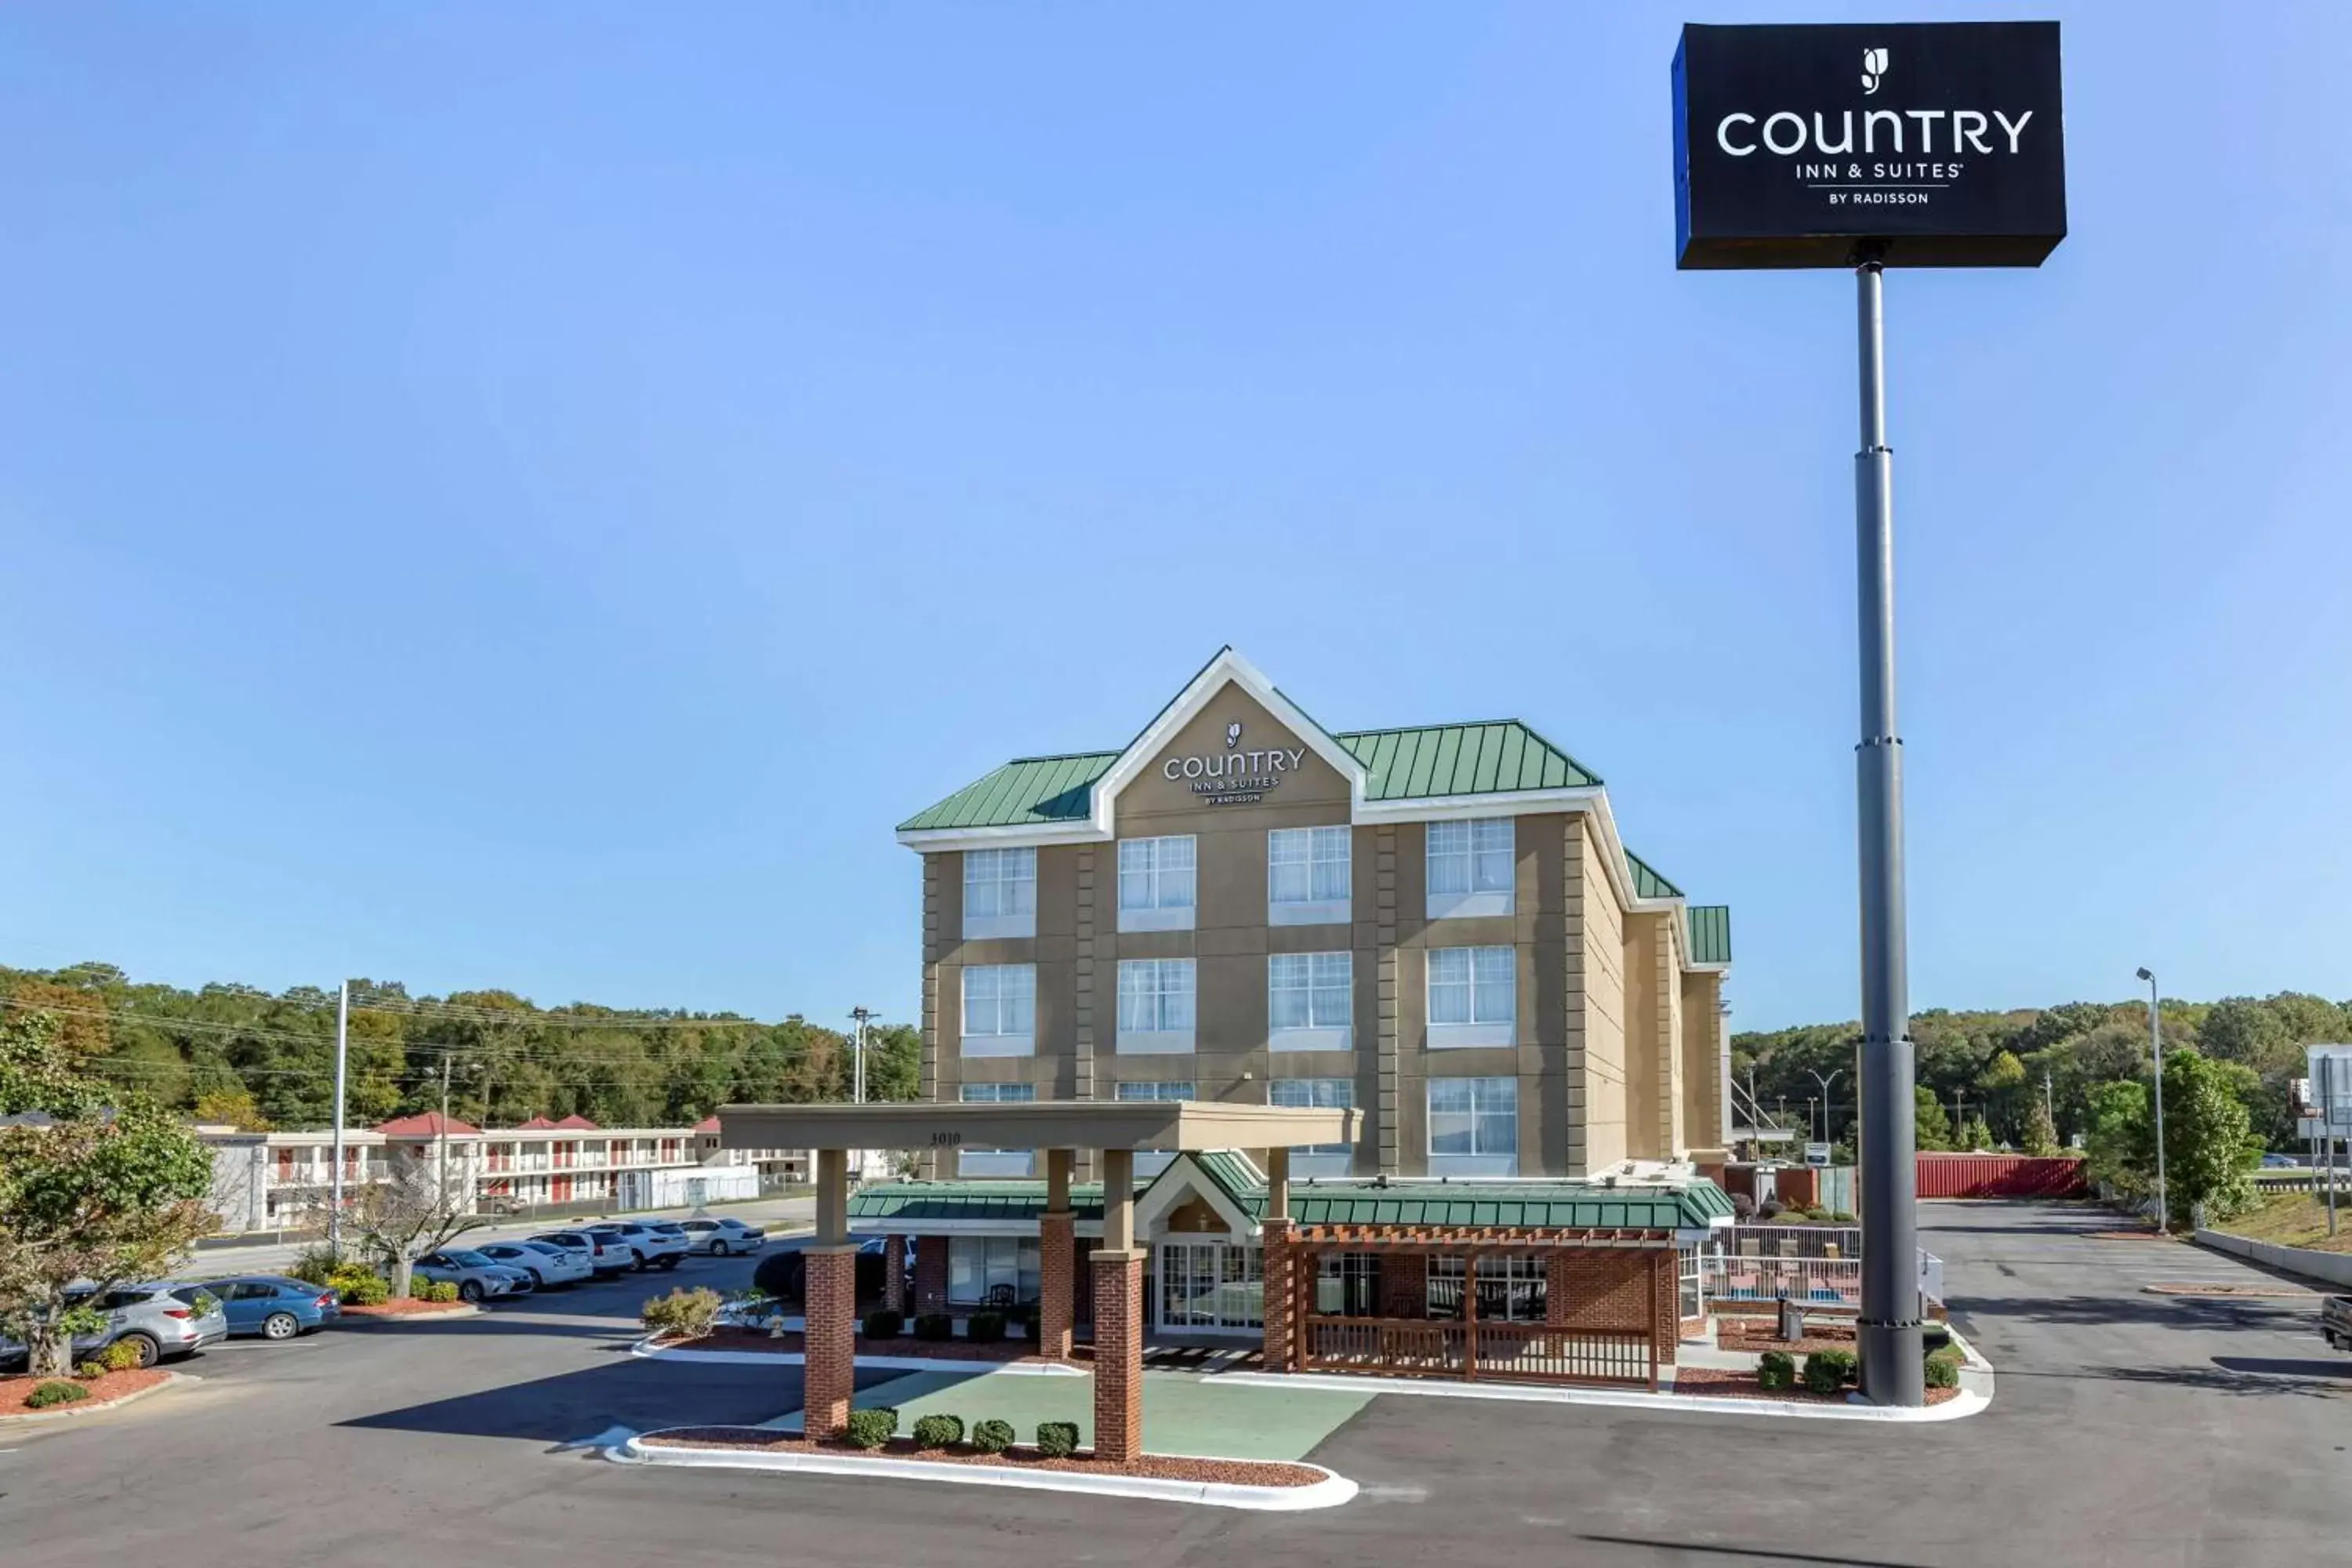 Property building in Country Inn & Suites by Radisson, Lumberton, NC